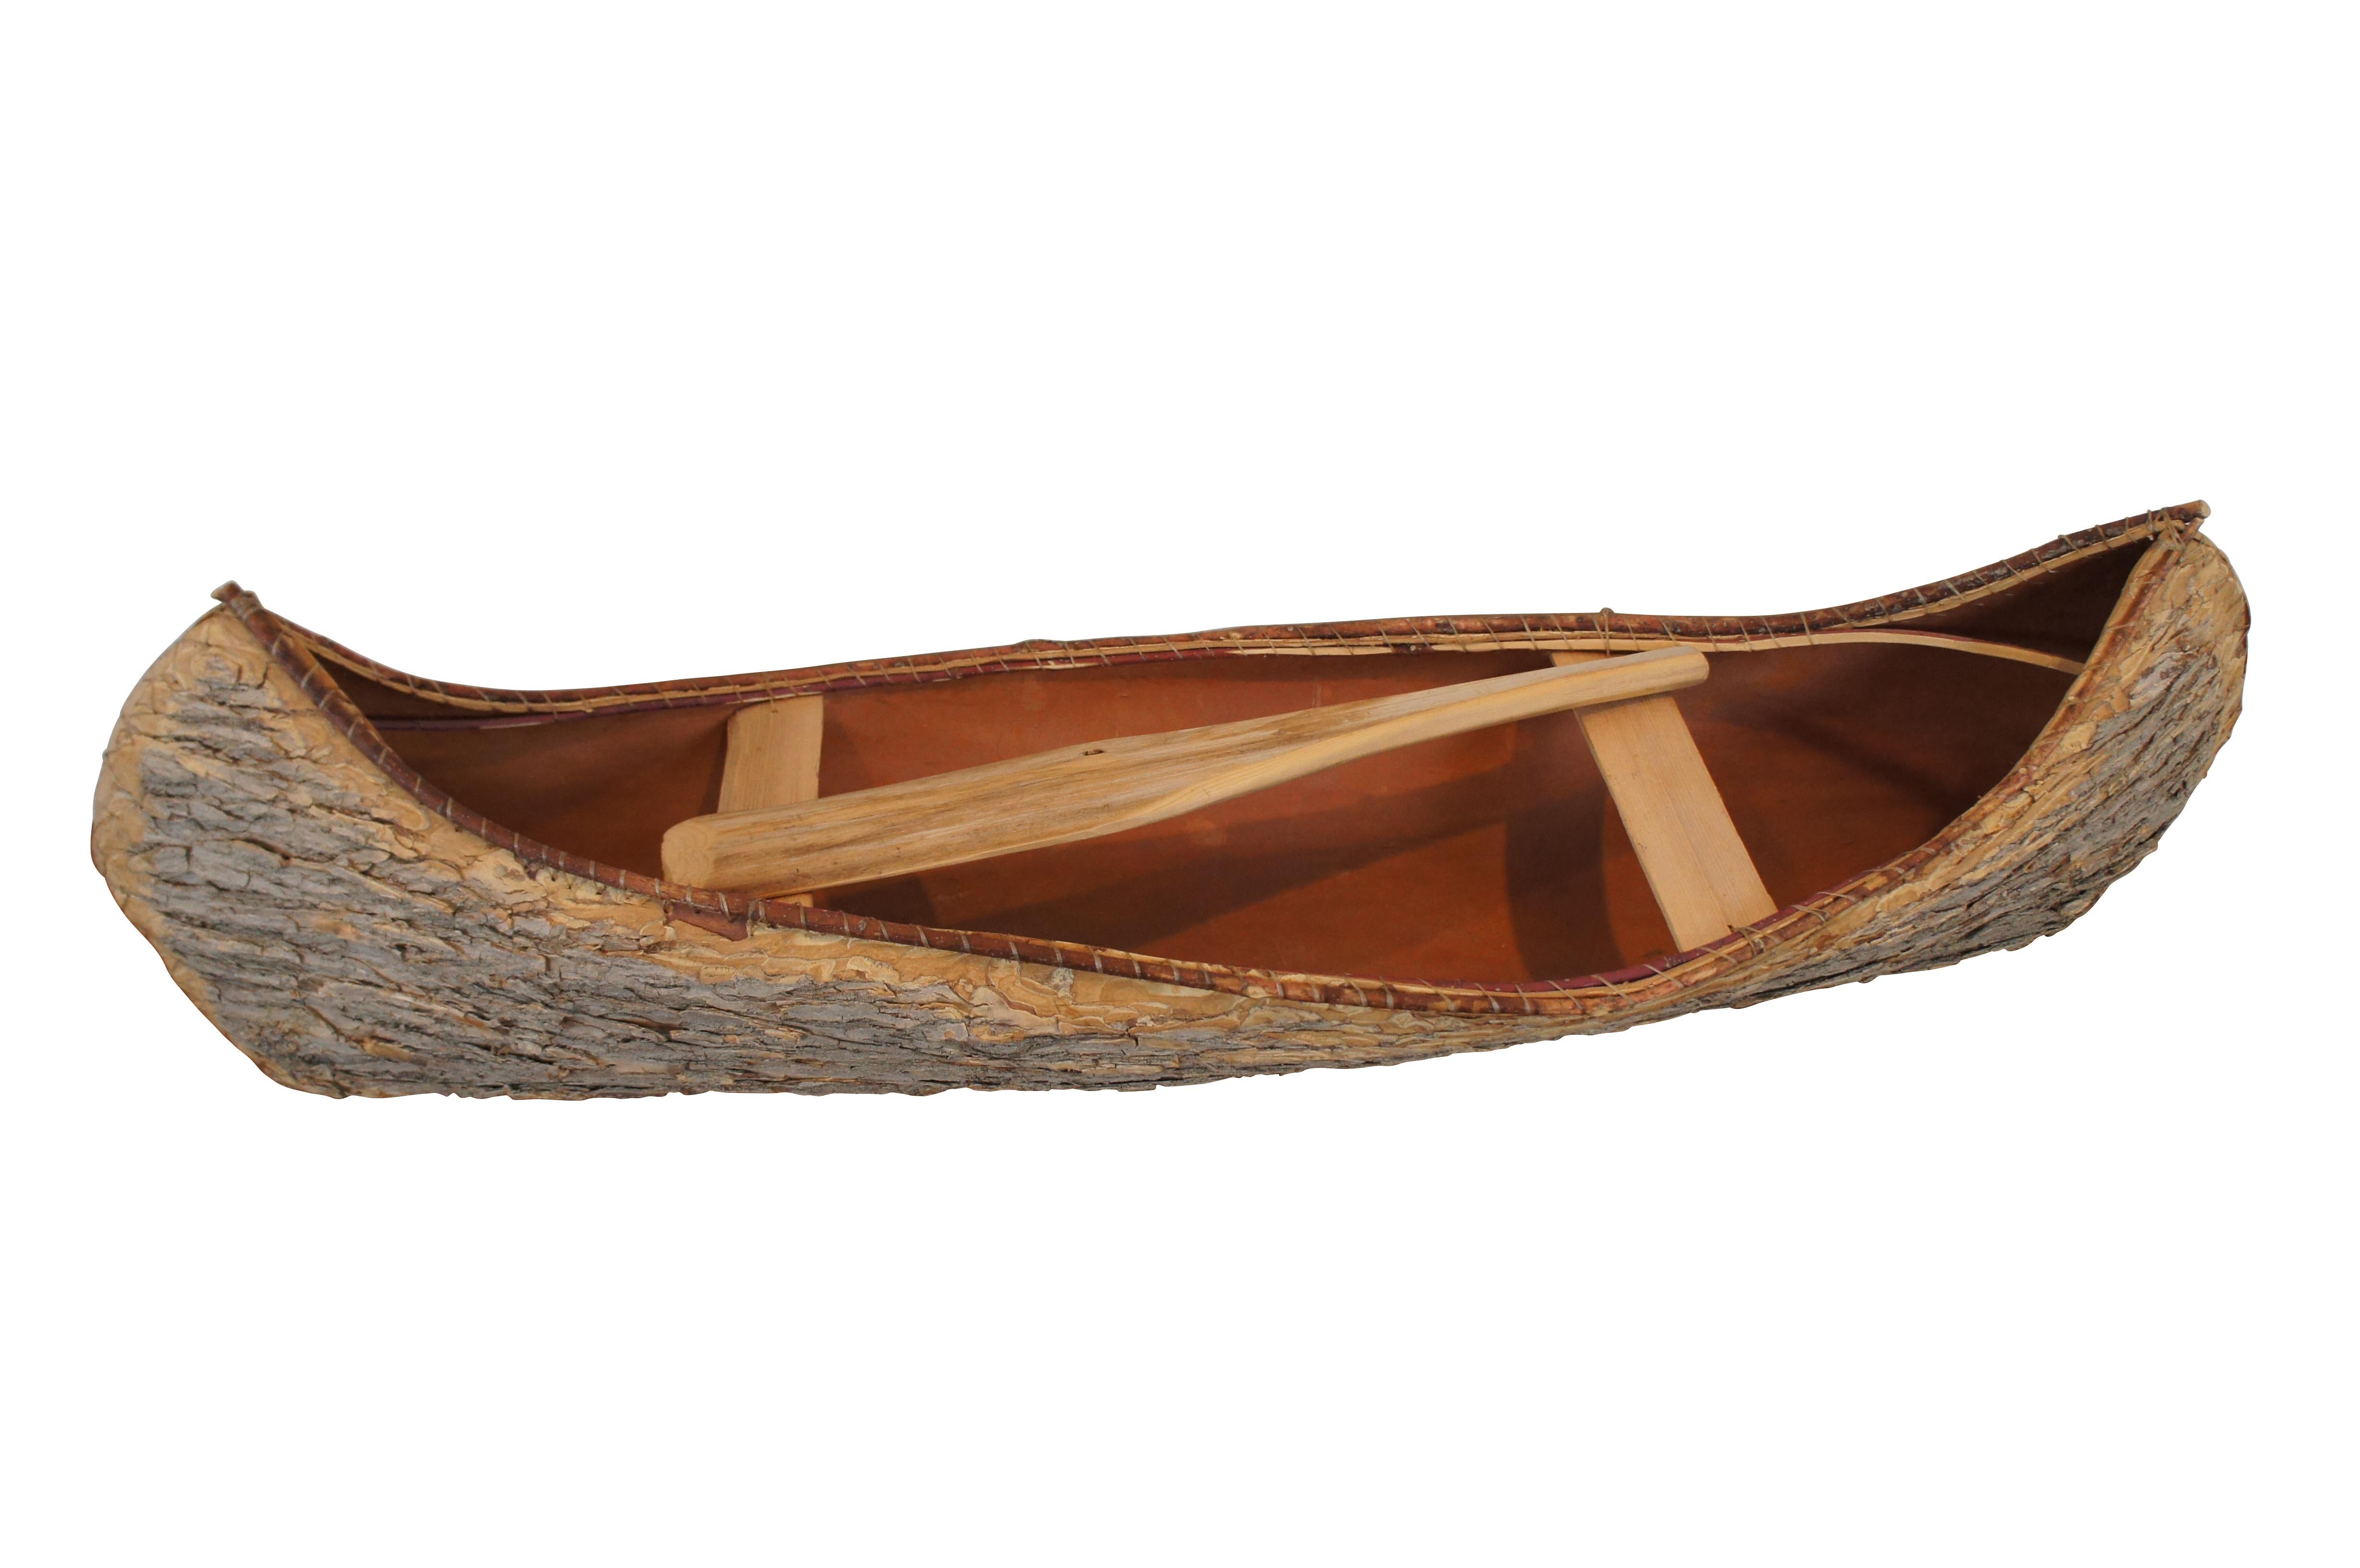 Vintage 1/3 scale folk art canoe model.  Made of birch bark and bentwood featuring traditional primitive construction.  Log cabin, lodge, store display.


DIMENSIONS

47” x 12” x 12.5” (Width x Depth x Height)